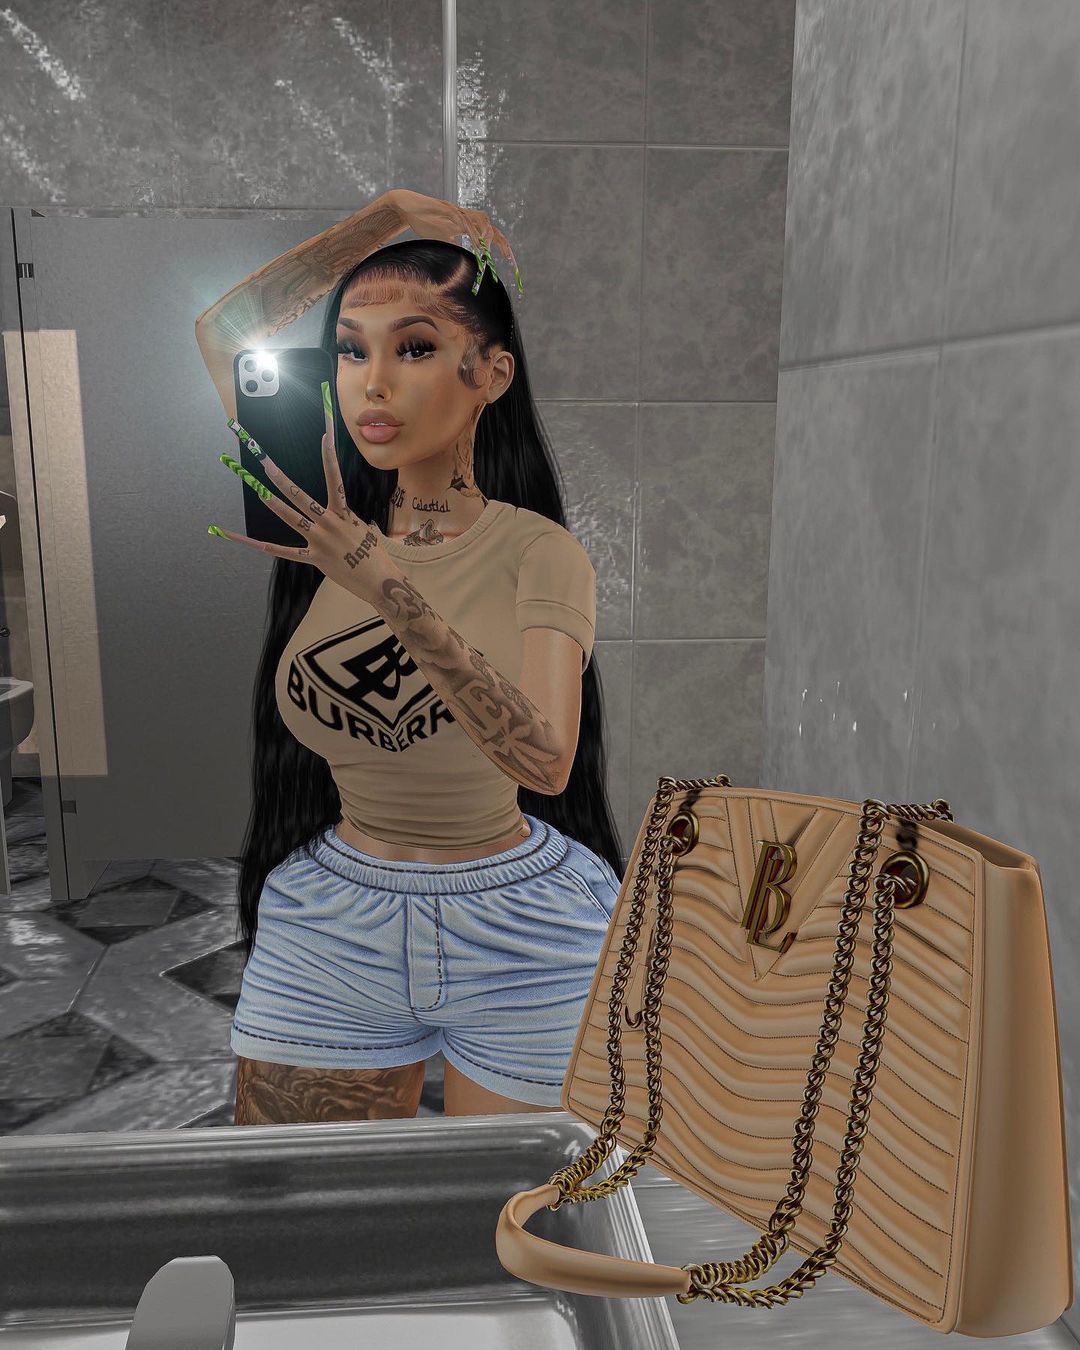 Tattooed Second Life female avatar in Burberry T-shirt takes a selfie with her iPhone